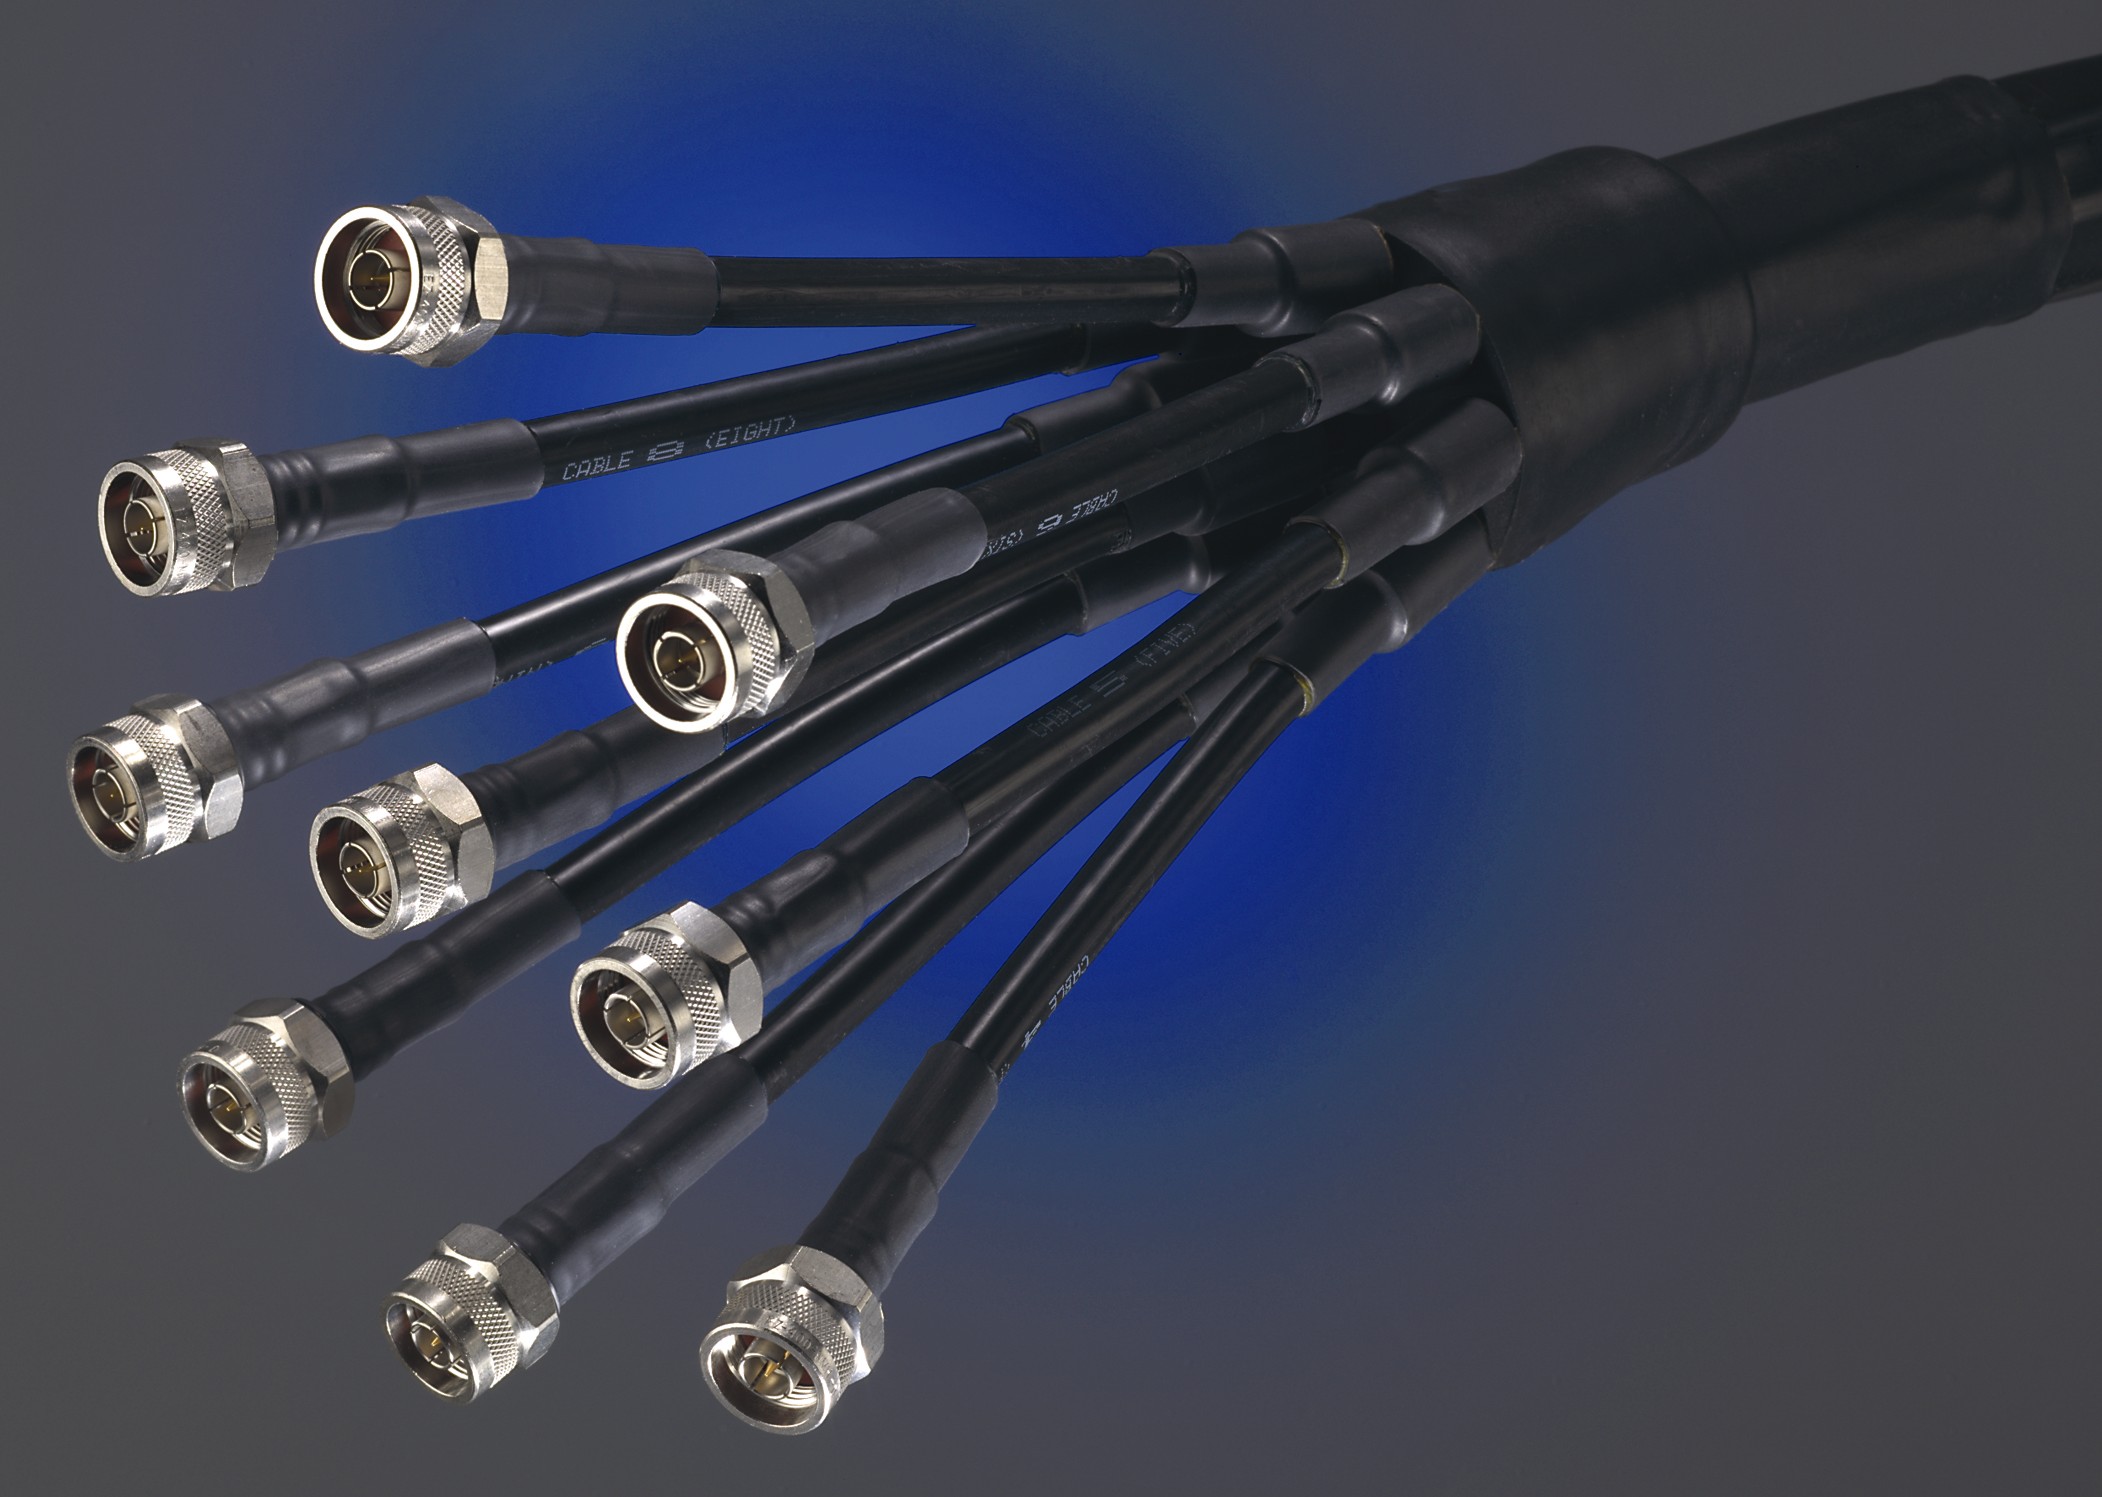 Times Microwave Systems coaxial cable assembly - EYOU Electronics Australia